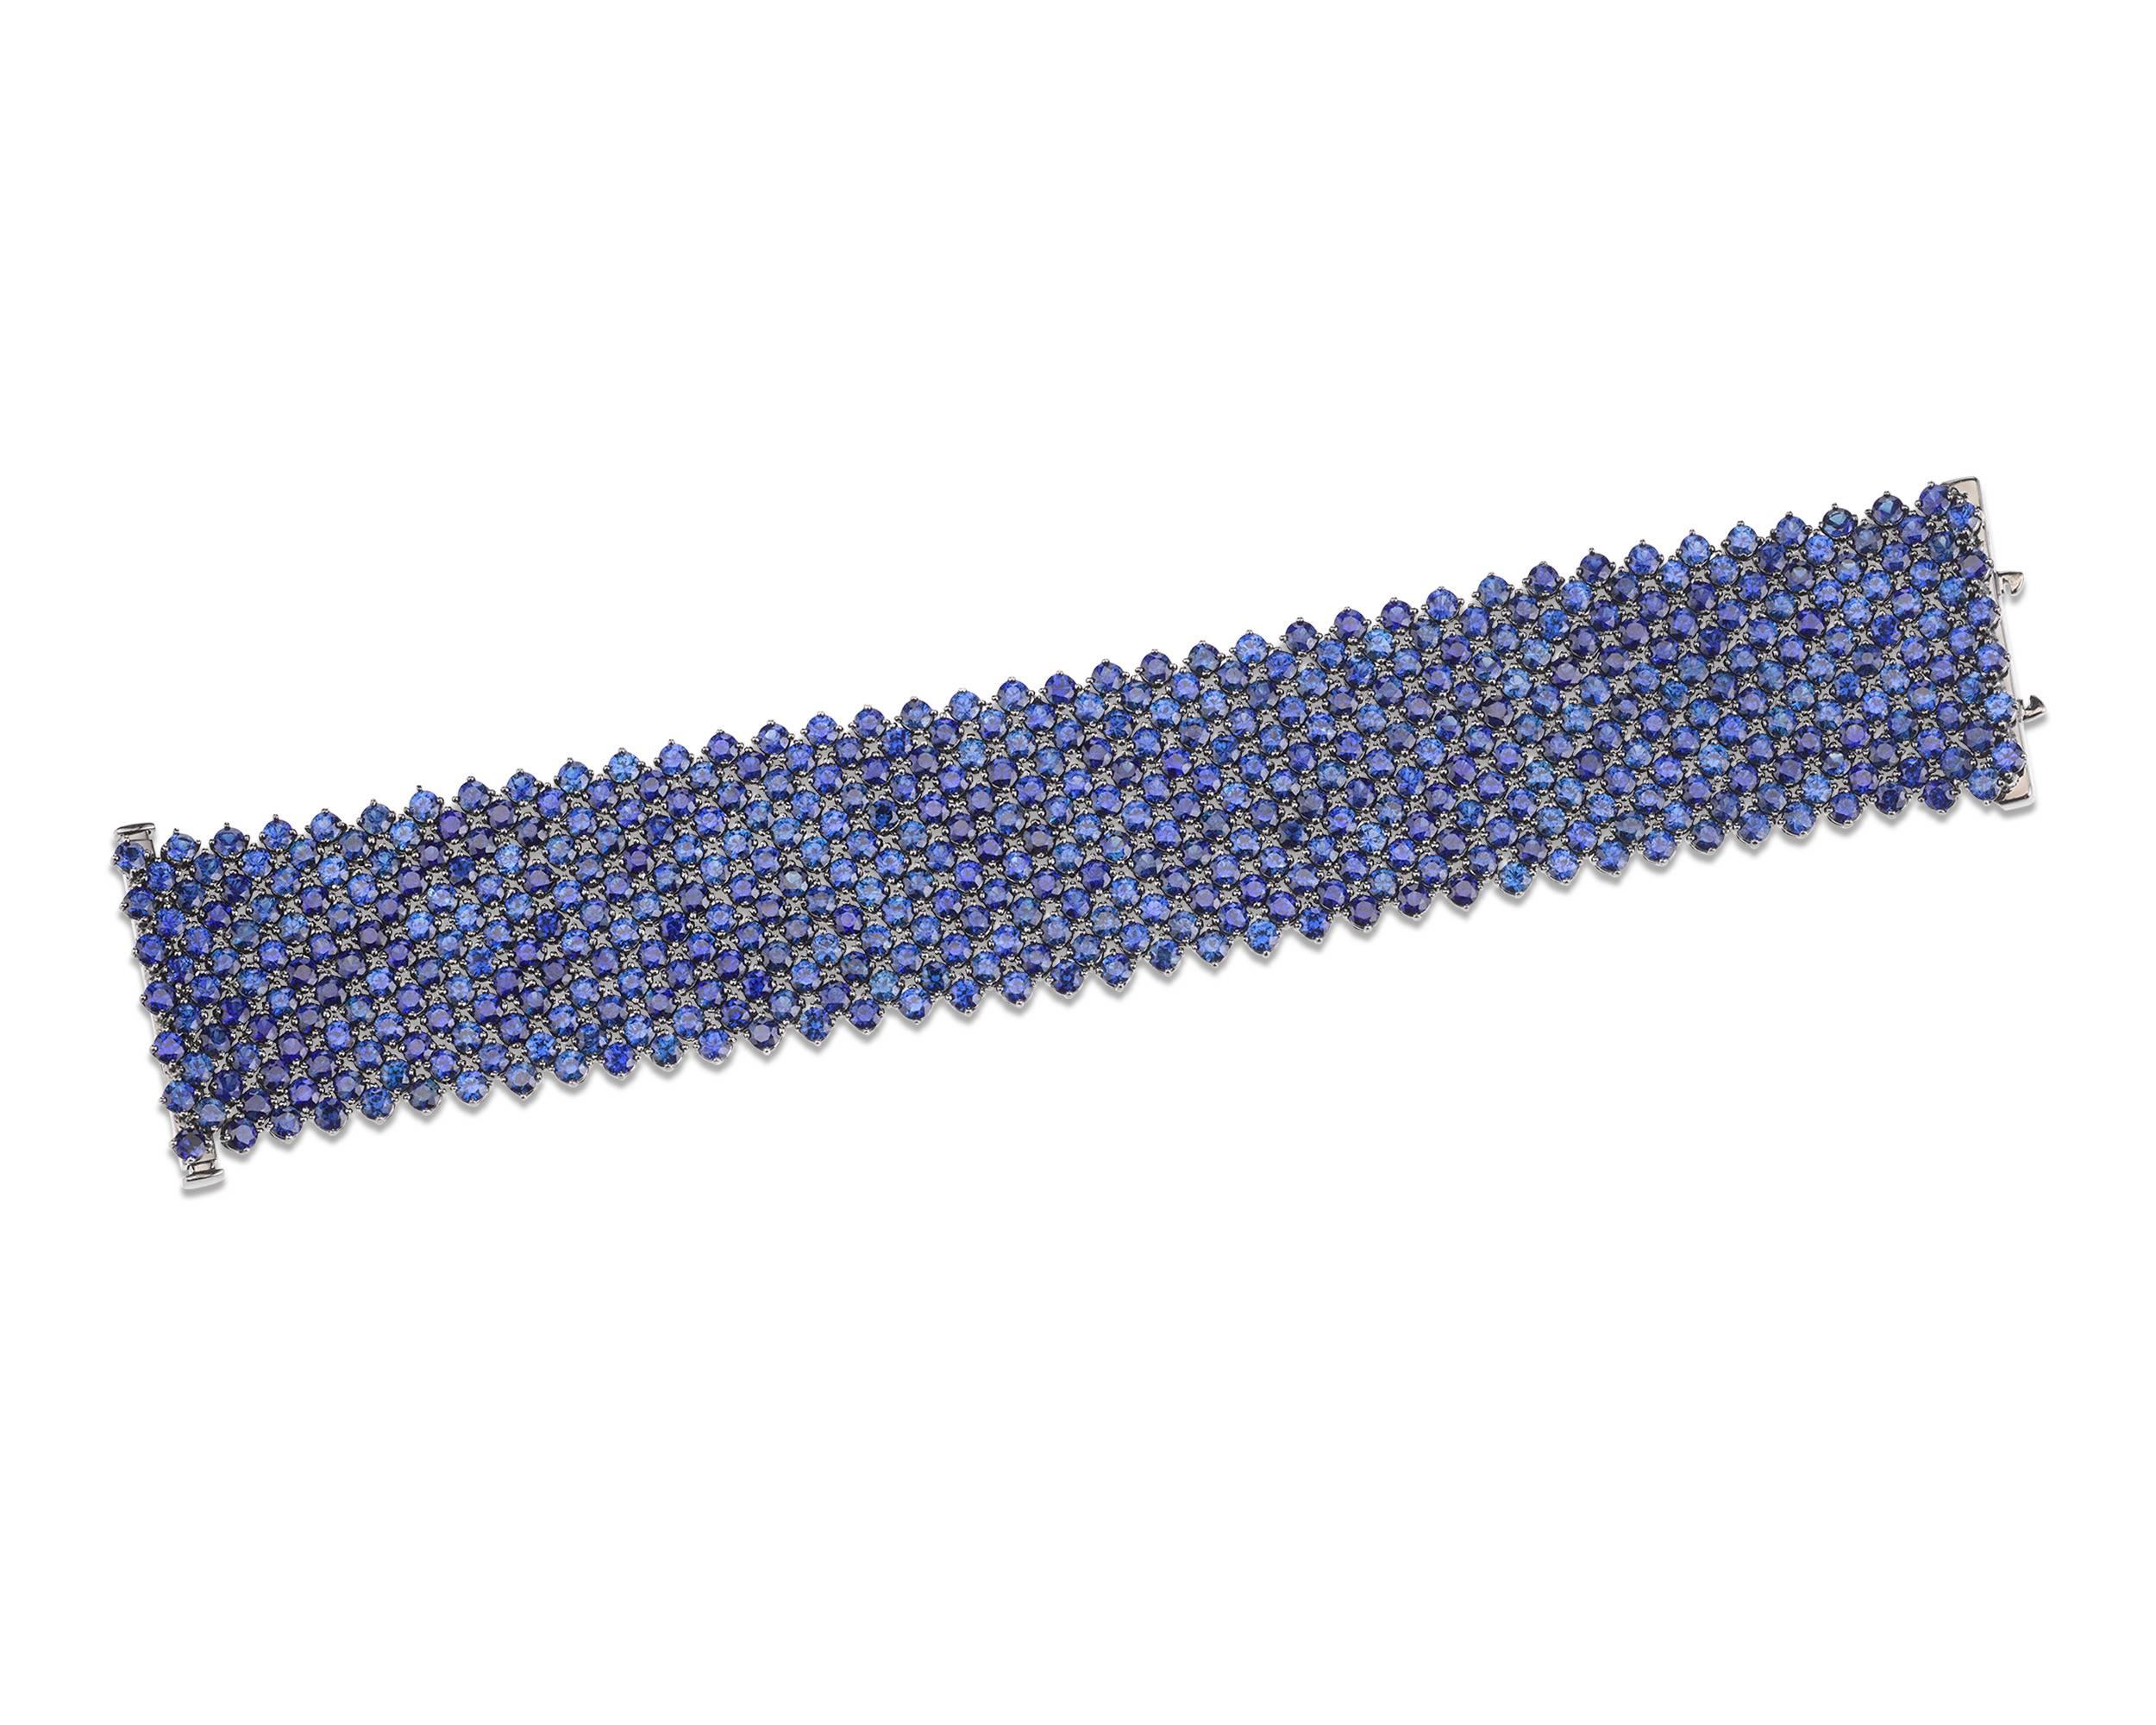 The 494 velvety-blue sapphires in this alluring bracelet cascade like water around the wrist. Certified by C. Dunaigre, the remarkable jewels weigh 66.58 total carats and boast an absolutely remarkable color. The stunning bracelet’s extraordinary